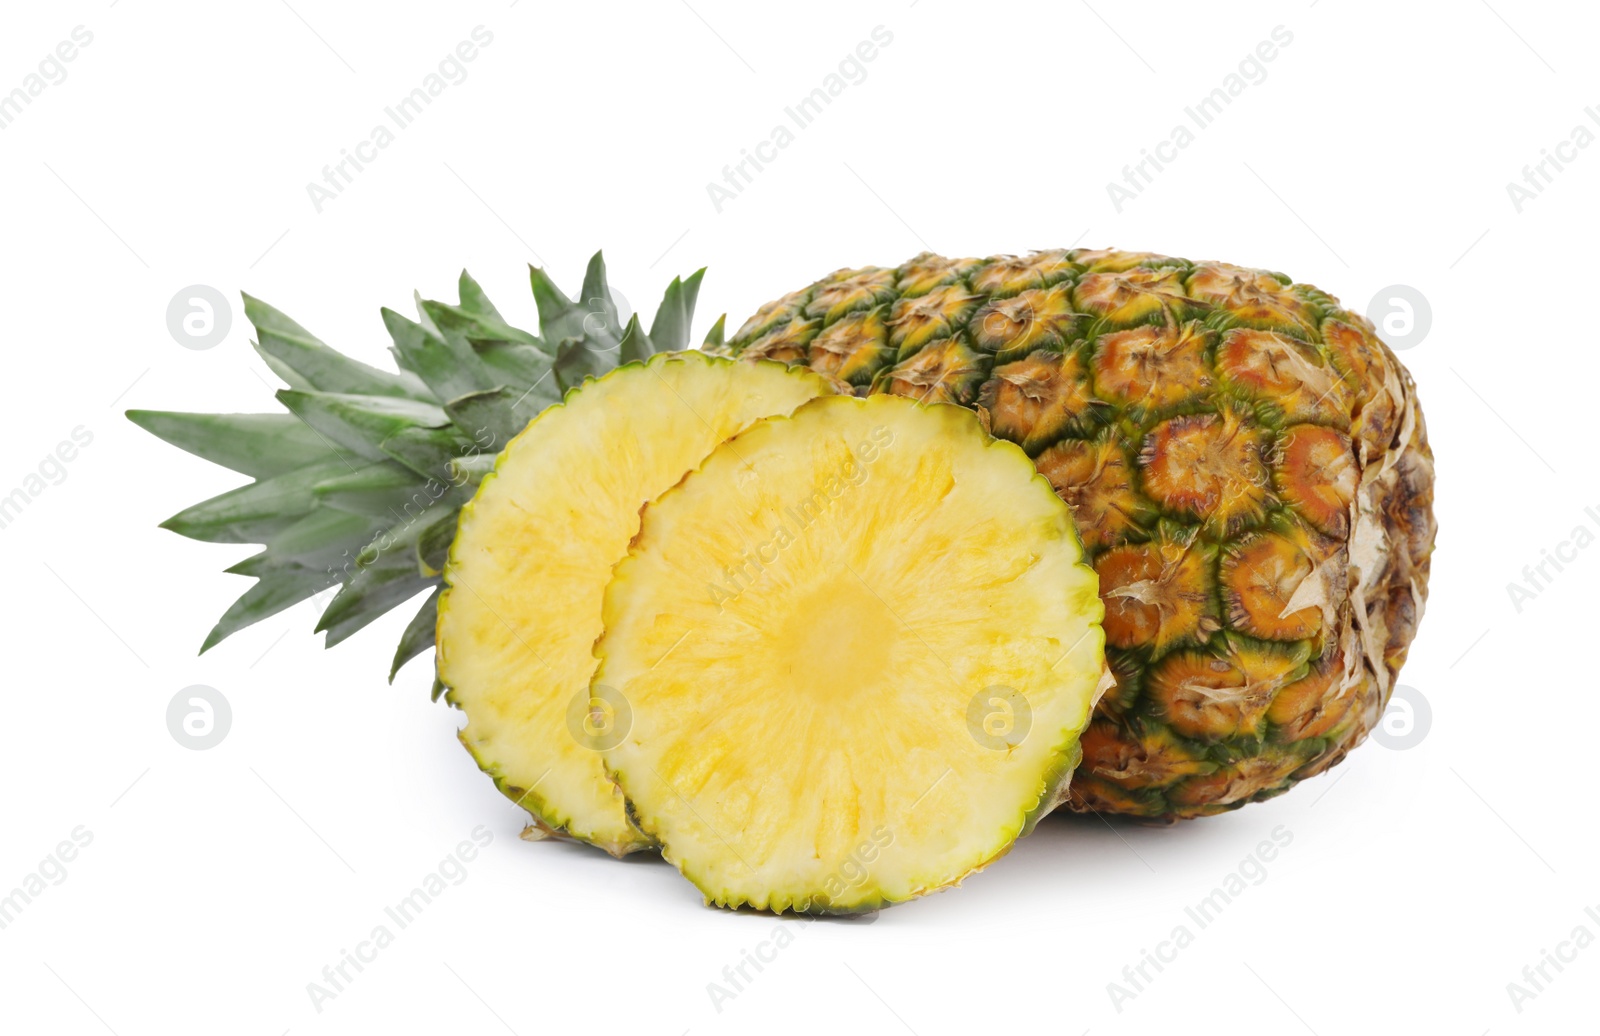 Photo of Cut and whole tasty pineapples on white background